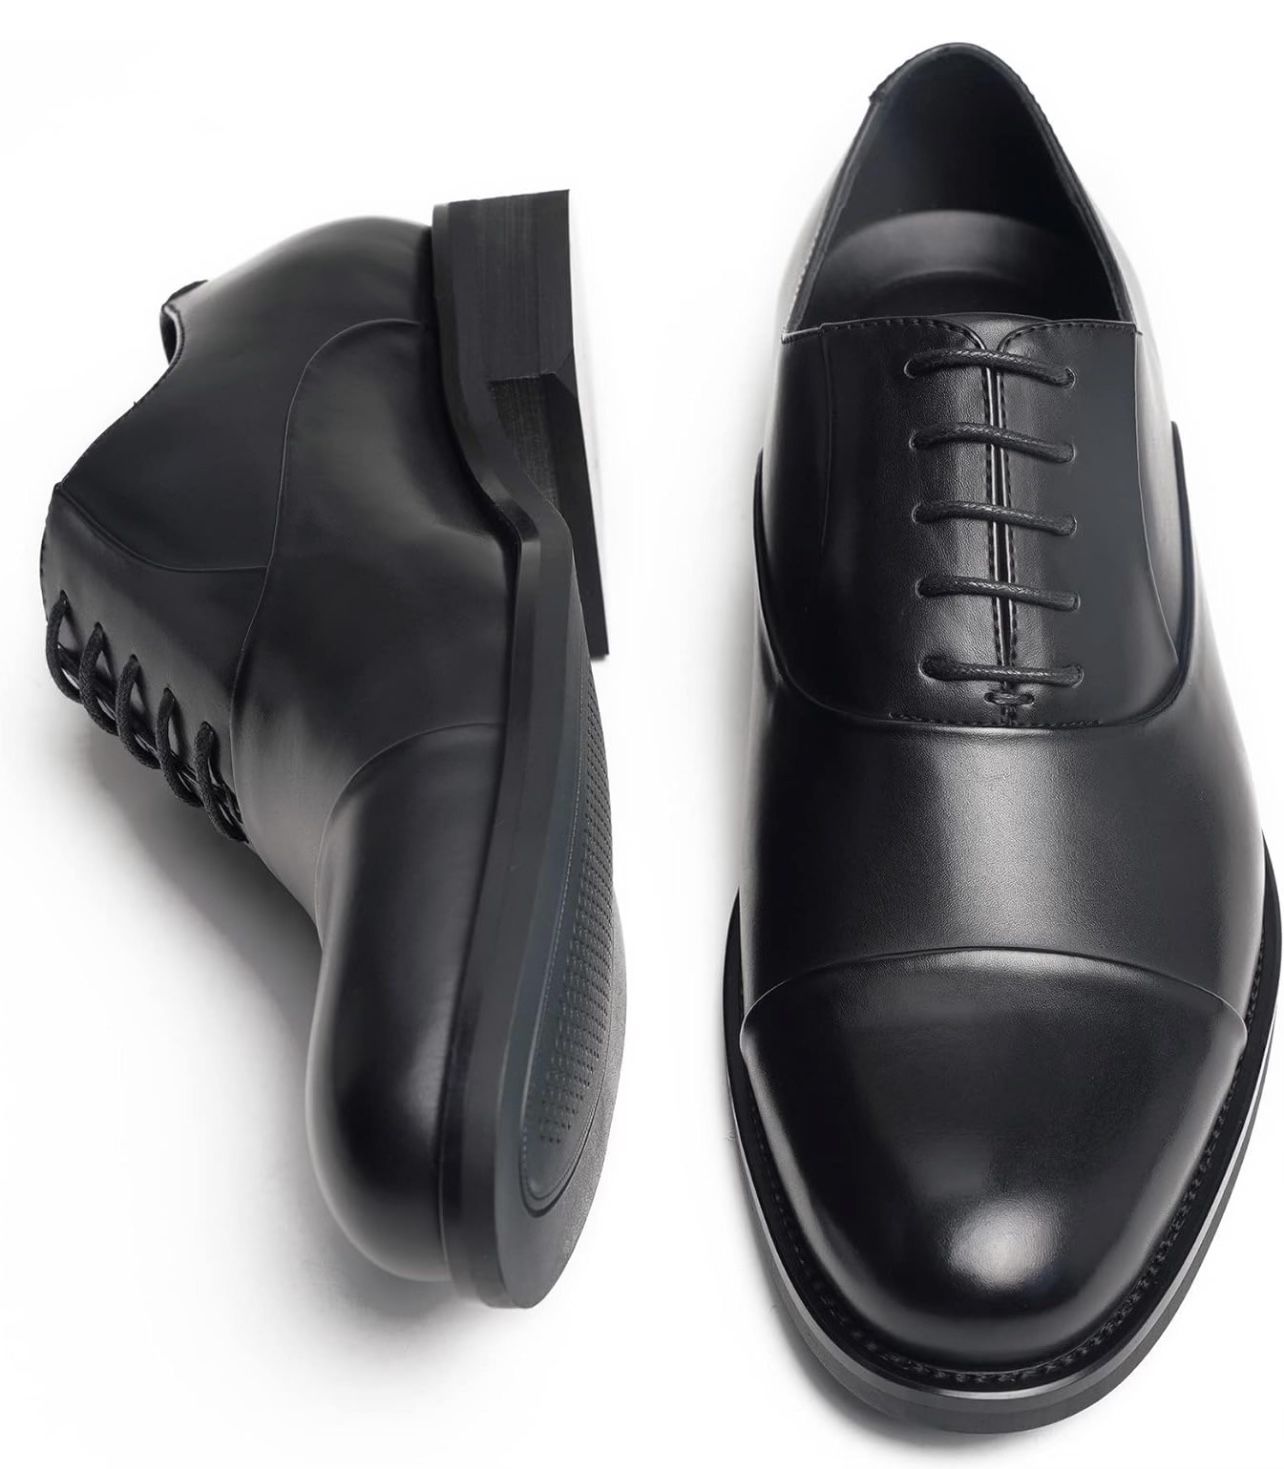 BRAND NEW IN BOX Goor Black Dress Shoes for Men Classic Modern Formal Cap Toe SIZE 10 Or 10.5